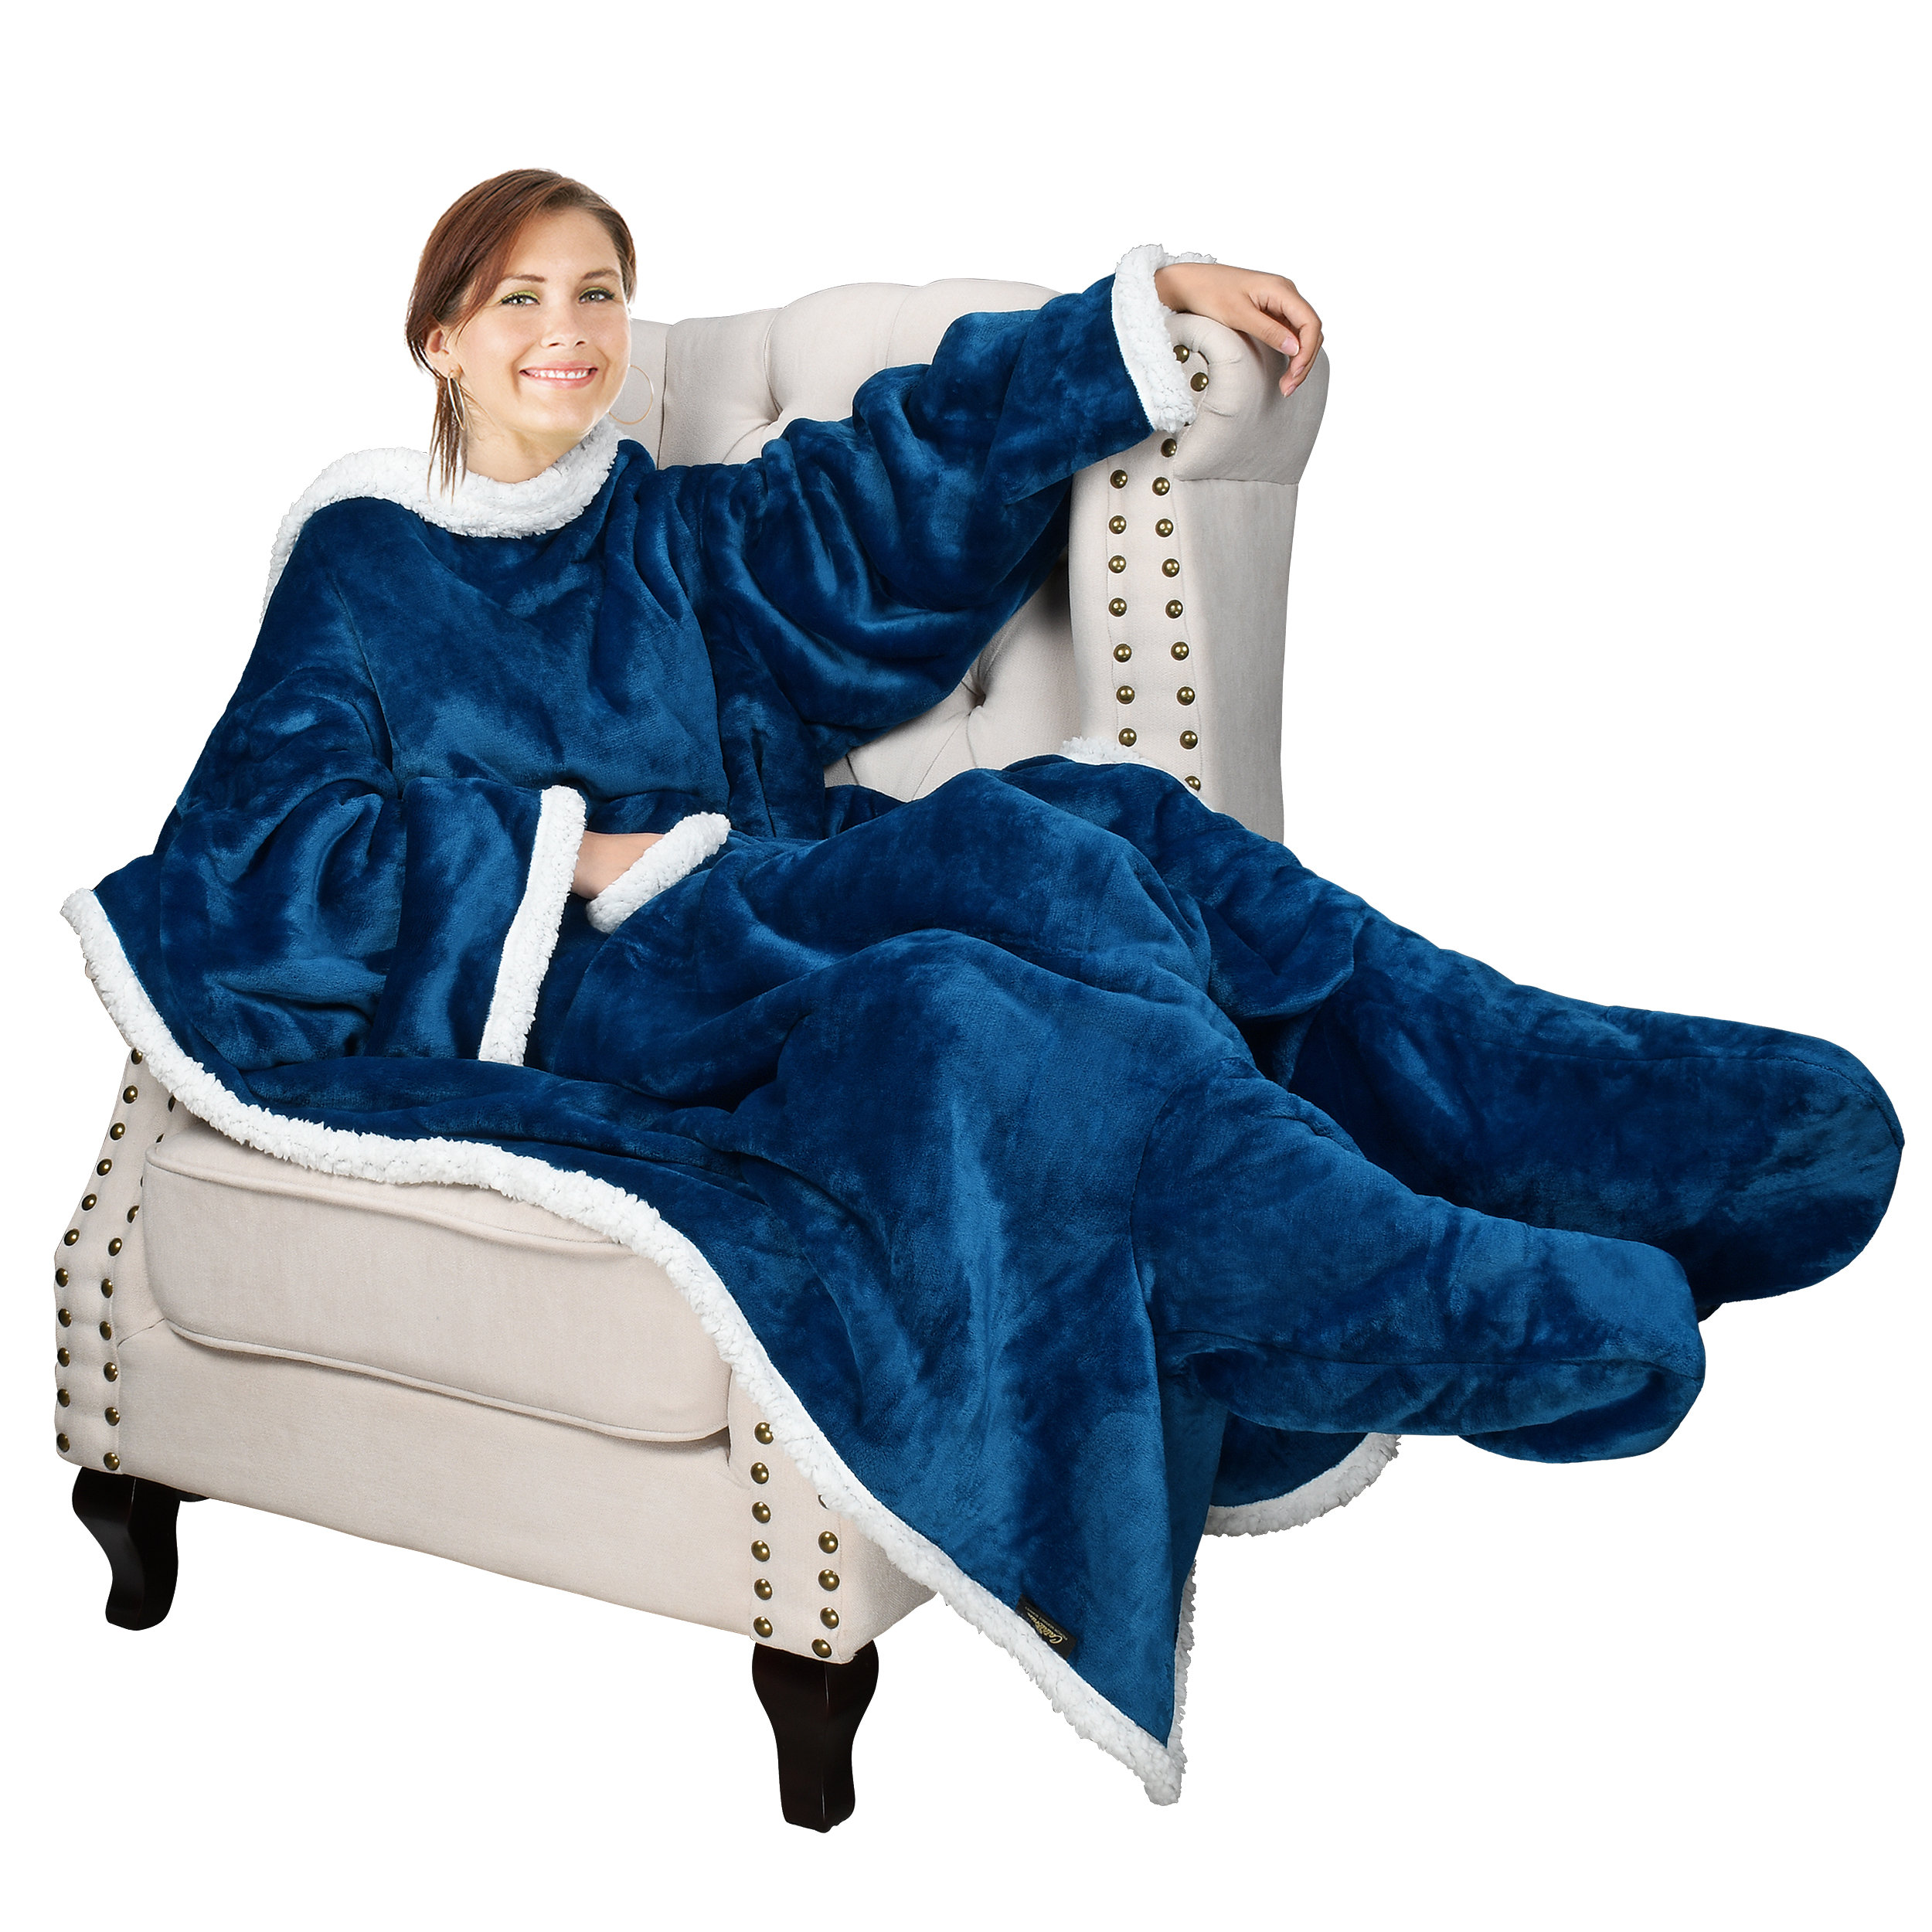 Catalonia Wearable Blanket with Sleeves and Pocket, Cozy Soft Fleece Micro  Plush Wrap Adult Blanket Robe for Women Men, Makes a Great Gift for